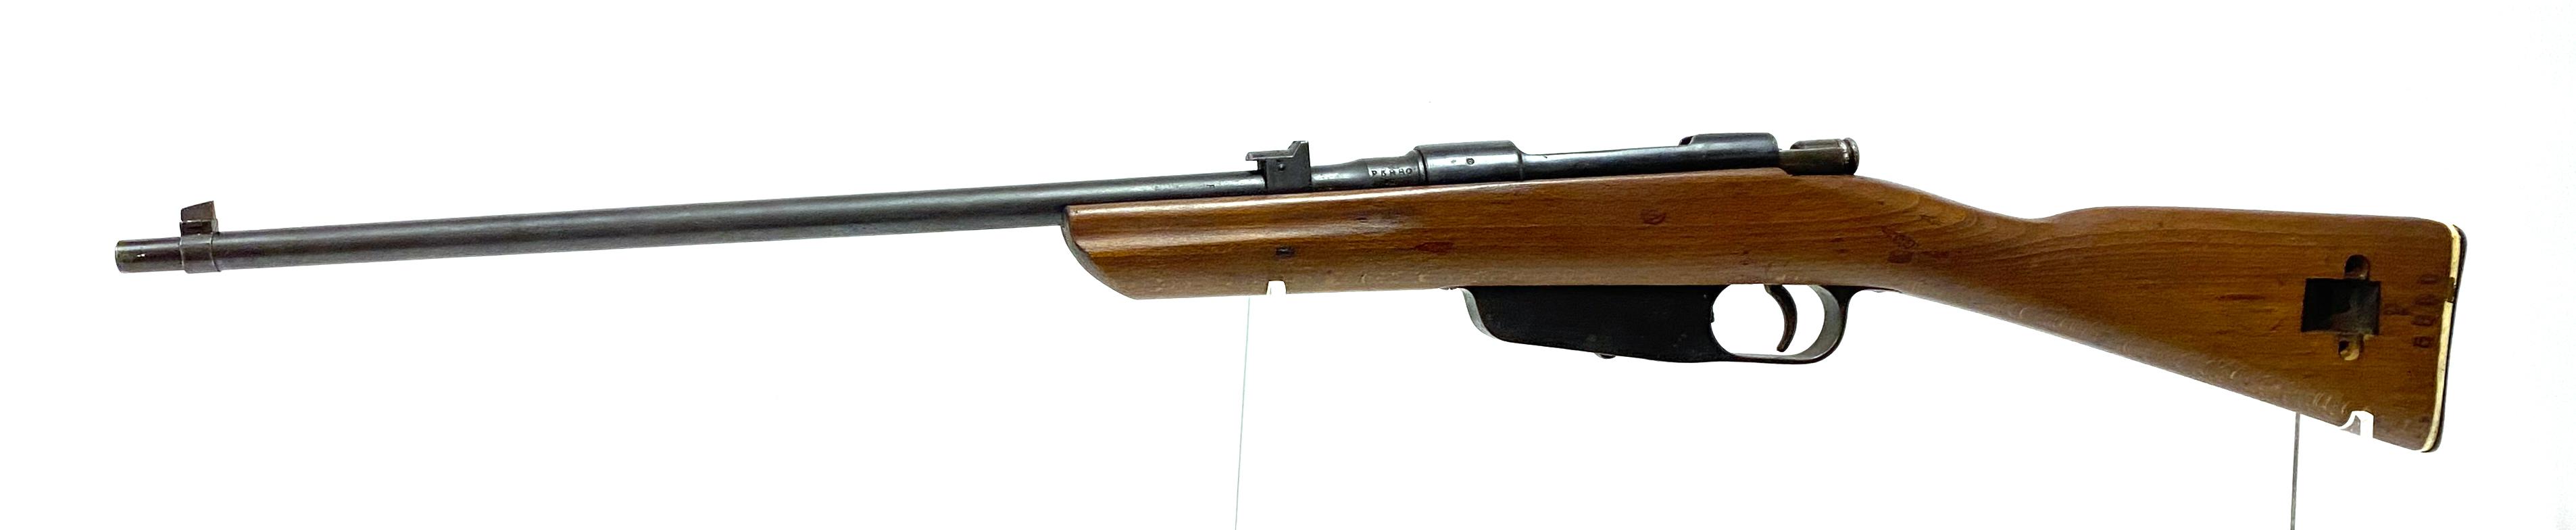 WWII 1939 RE Terni M91 7.35 Carcano Bolt Action Rifle